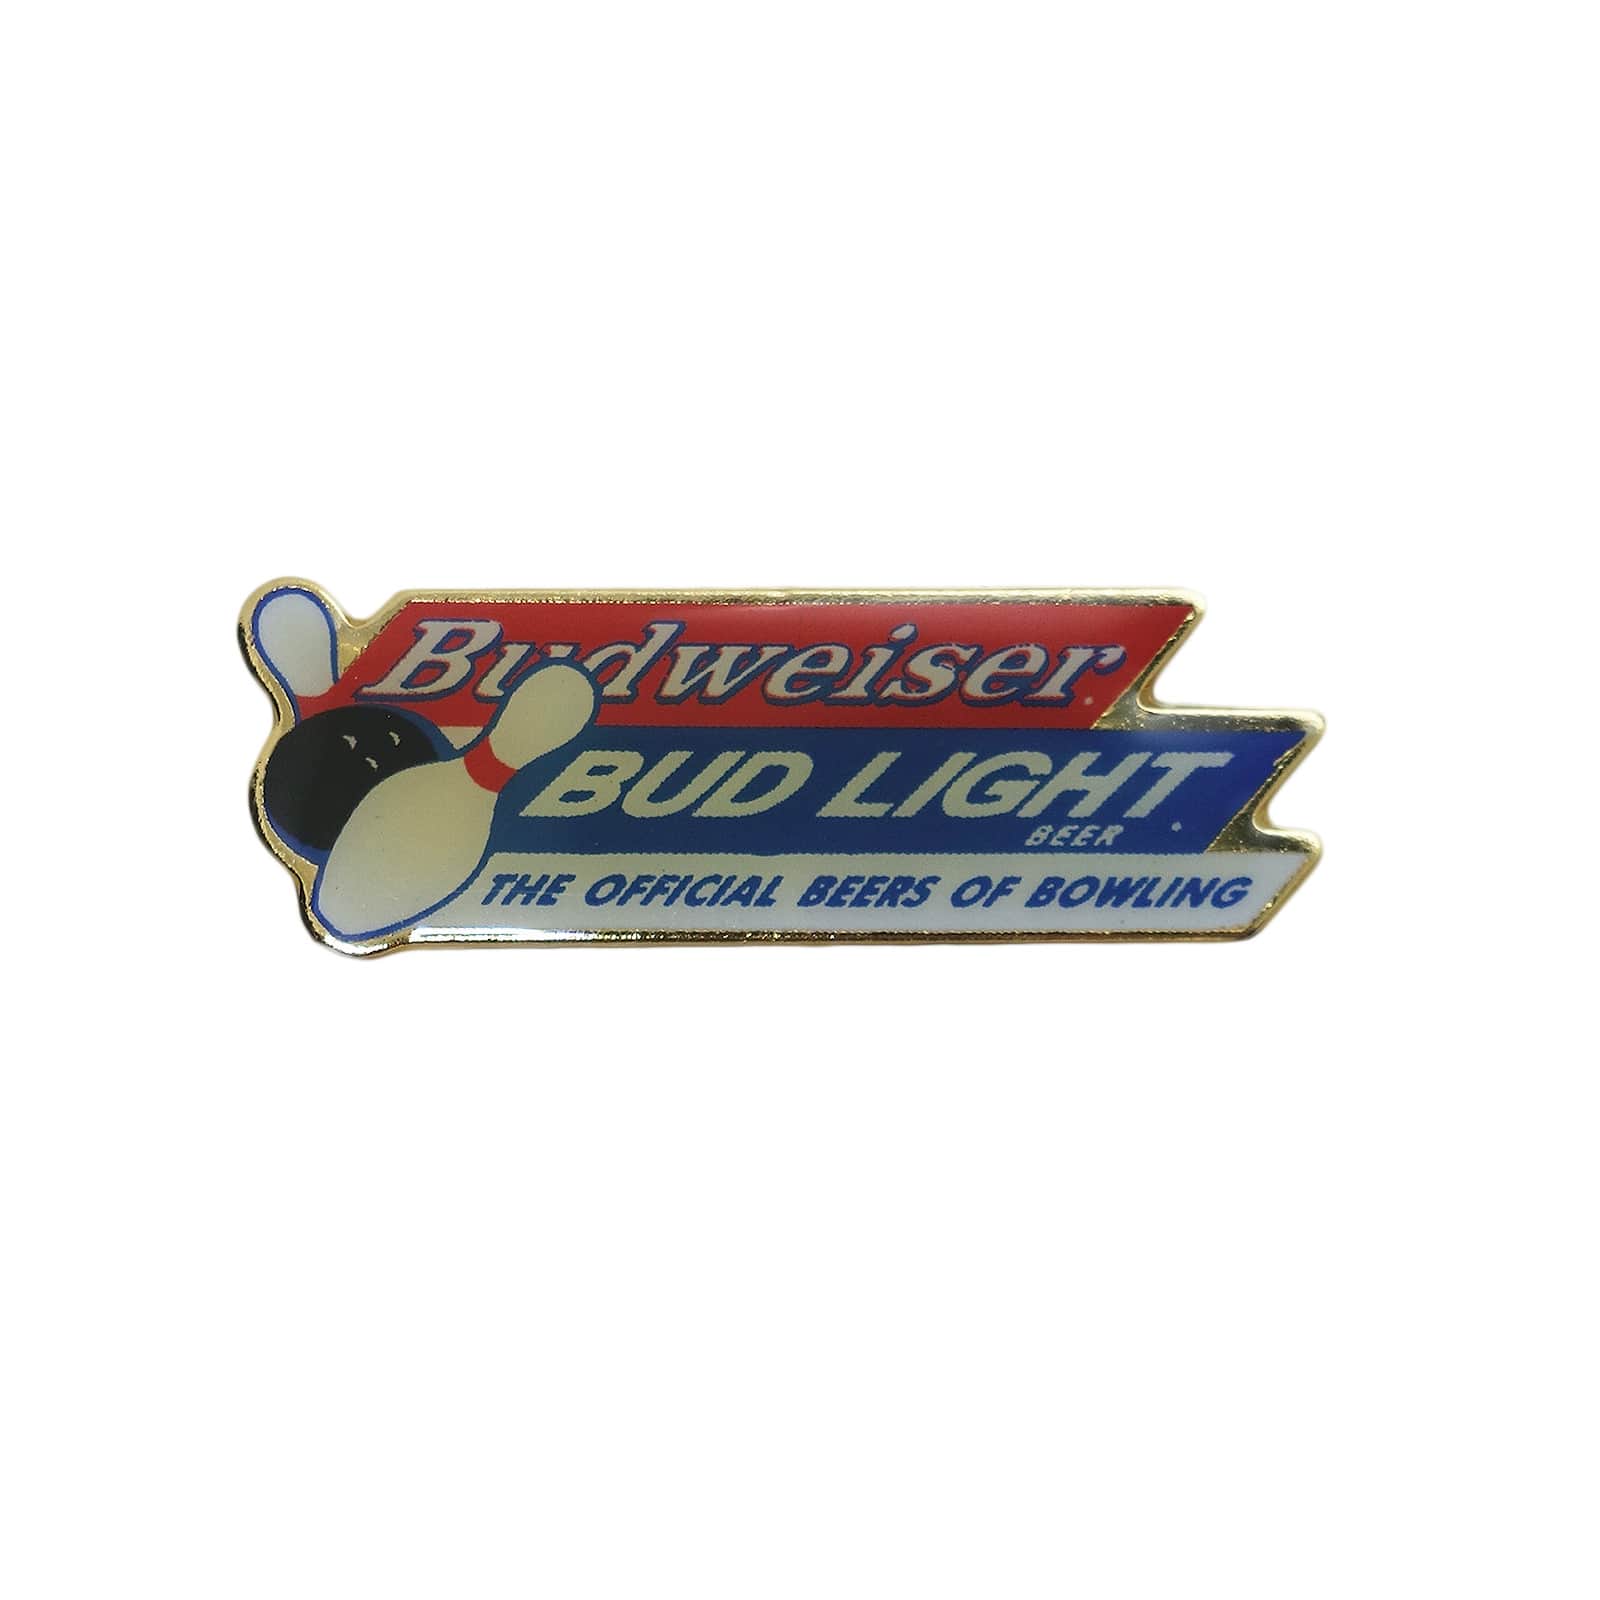 THE OFFICIAL BEERS OF BOWLING ピンズ Budweiser 留め具付き